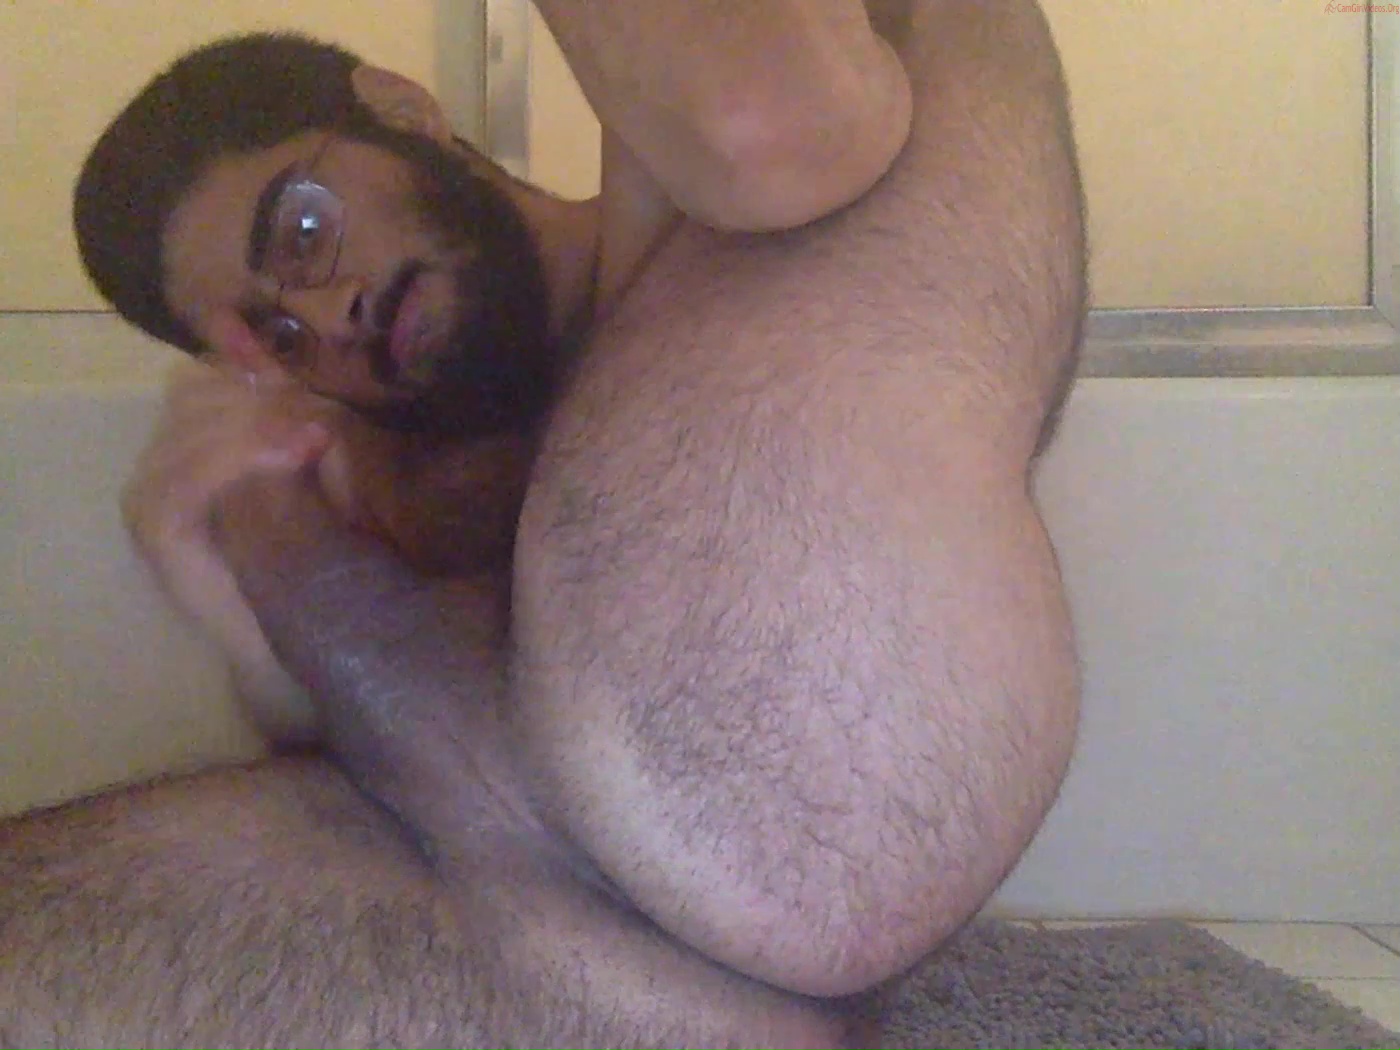 Hairy Arab Porn - Hairy arab in an intense session with himself - ThisVid.com